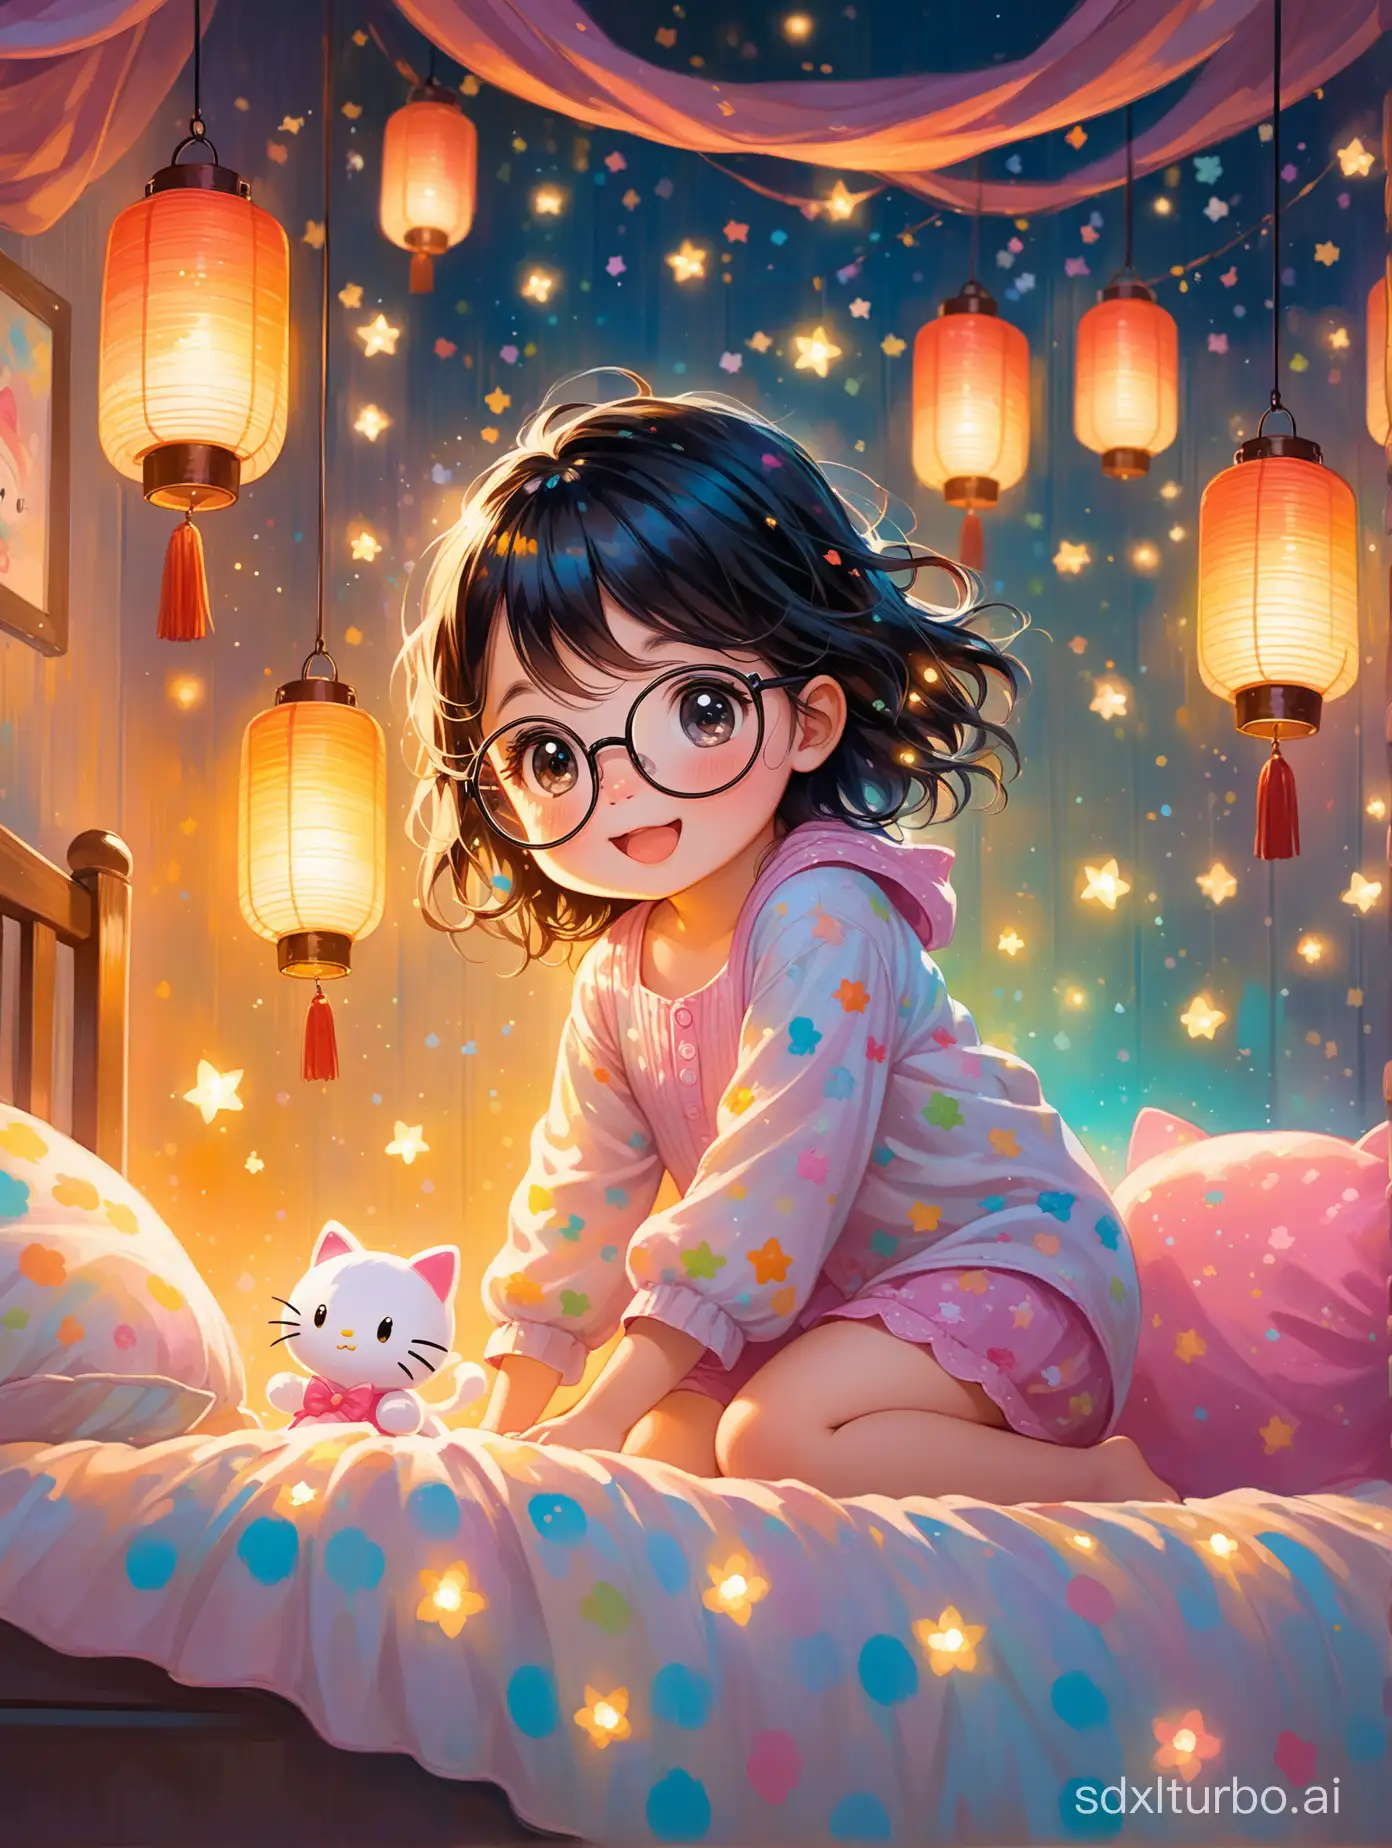 Whimsical-Toddler-Girl-Playing-Hide-and-Seek-with-Hello-Kitty-Under-Magical-Lanternlit-Bed